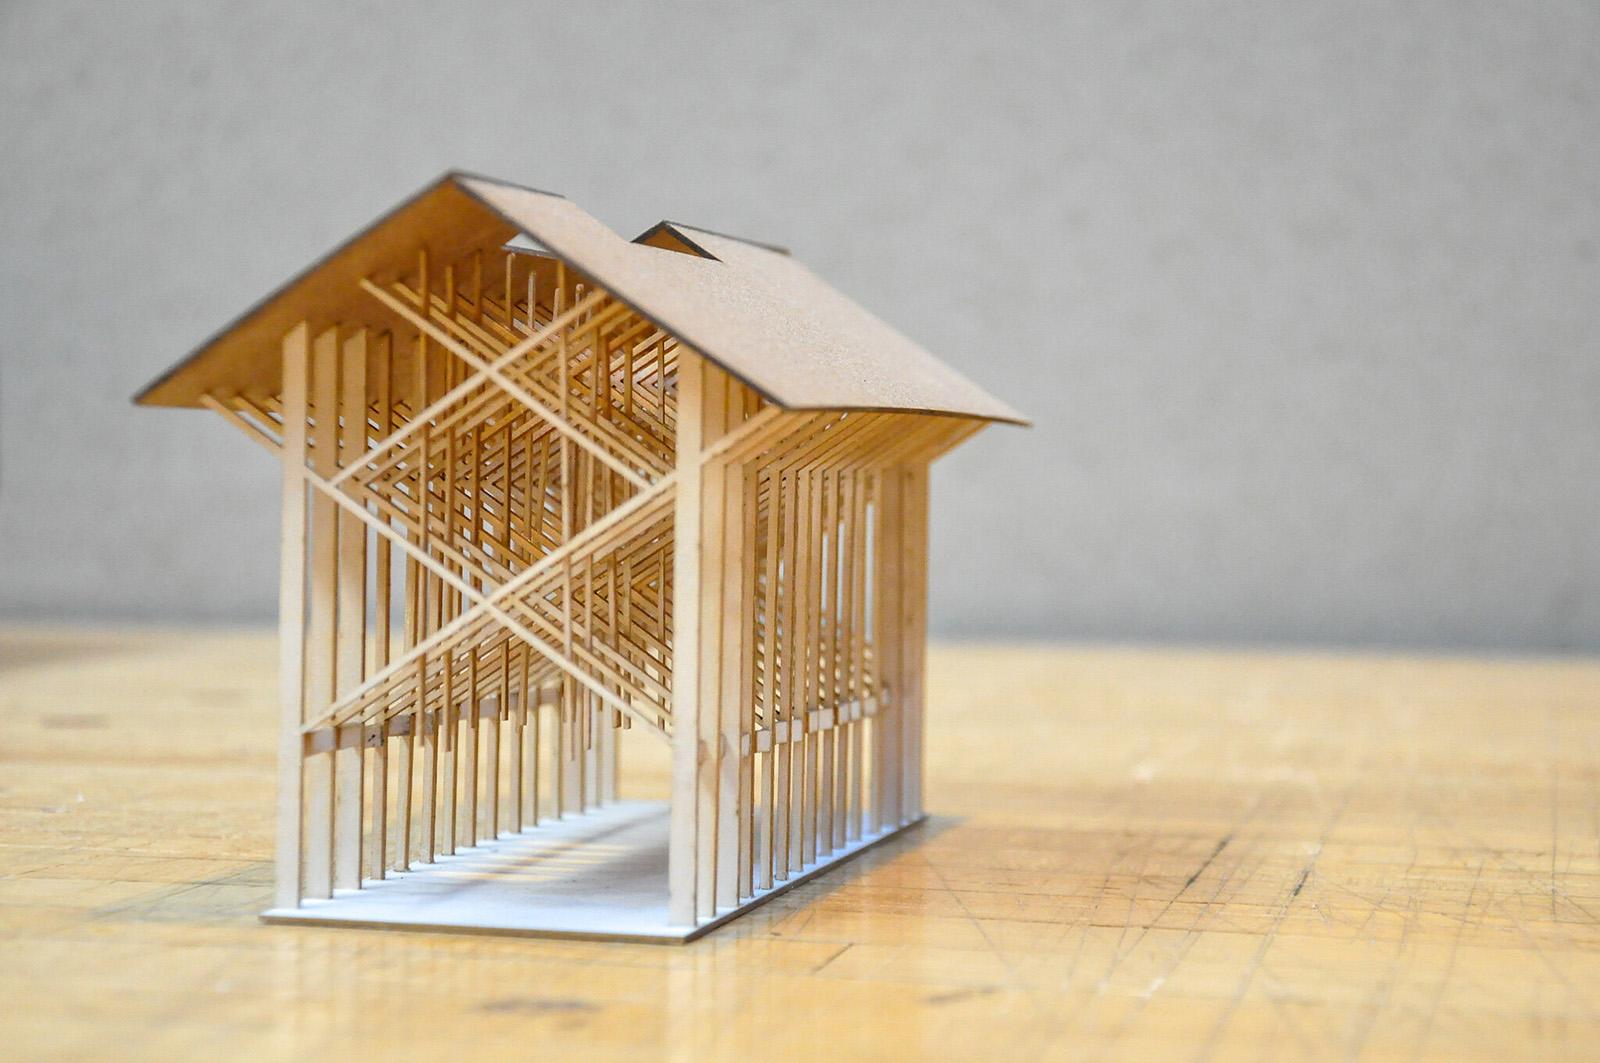 A small wooden house model